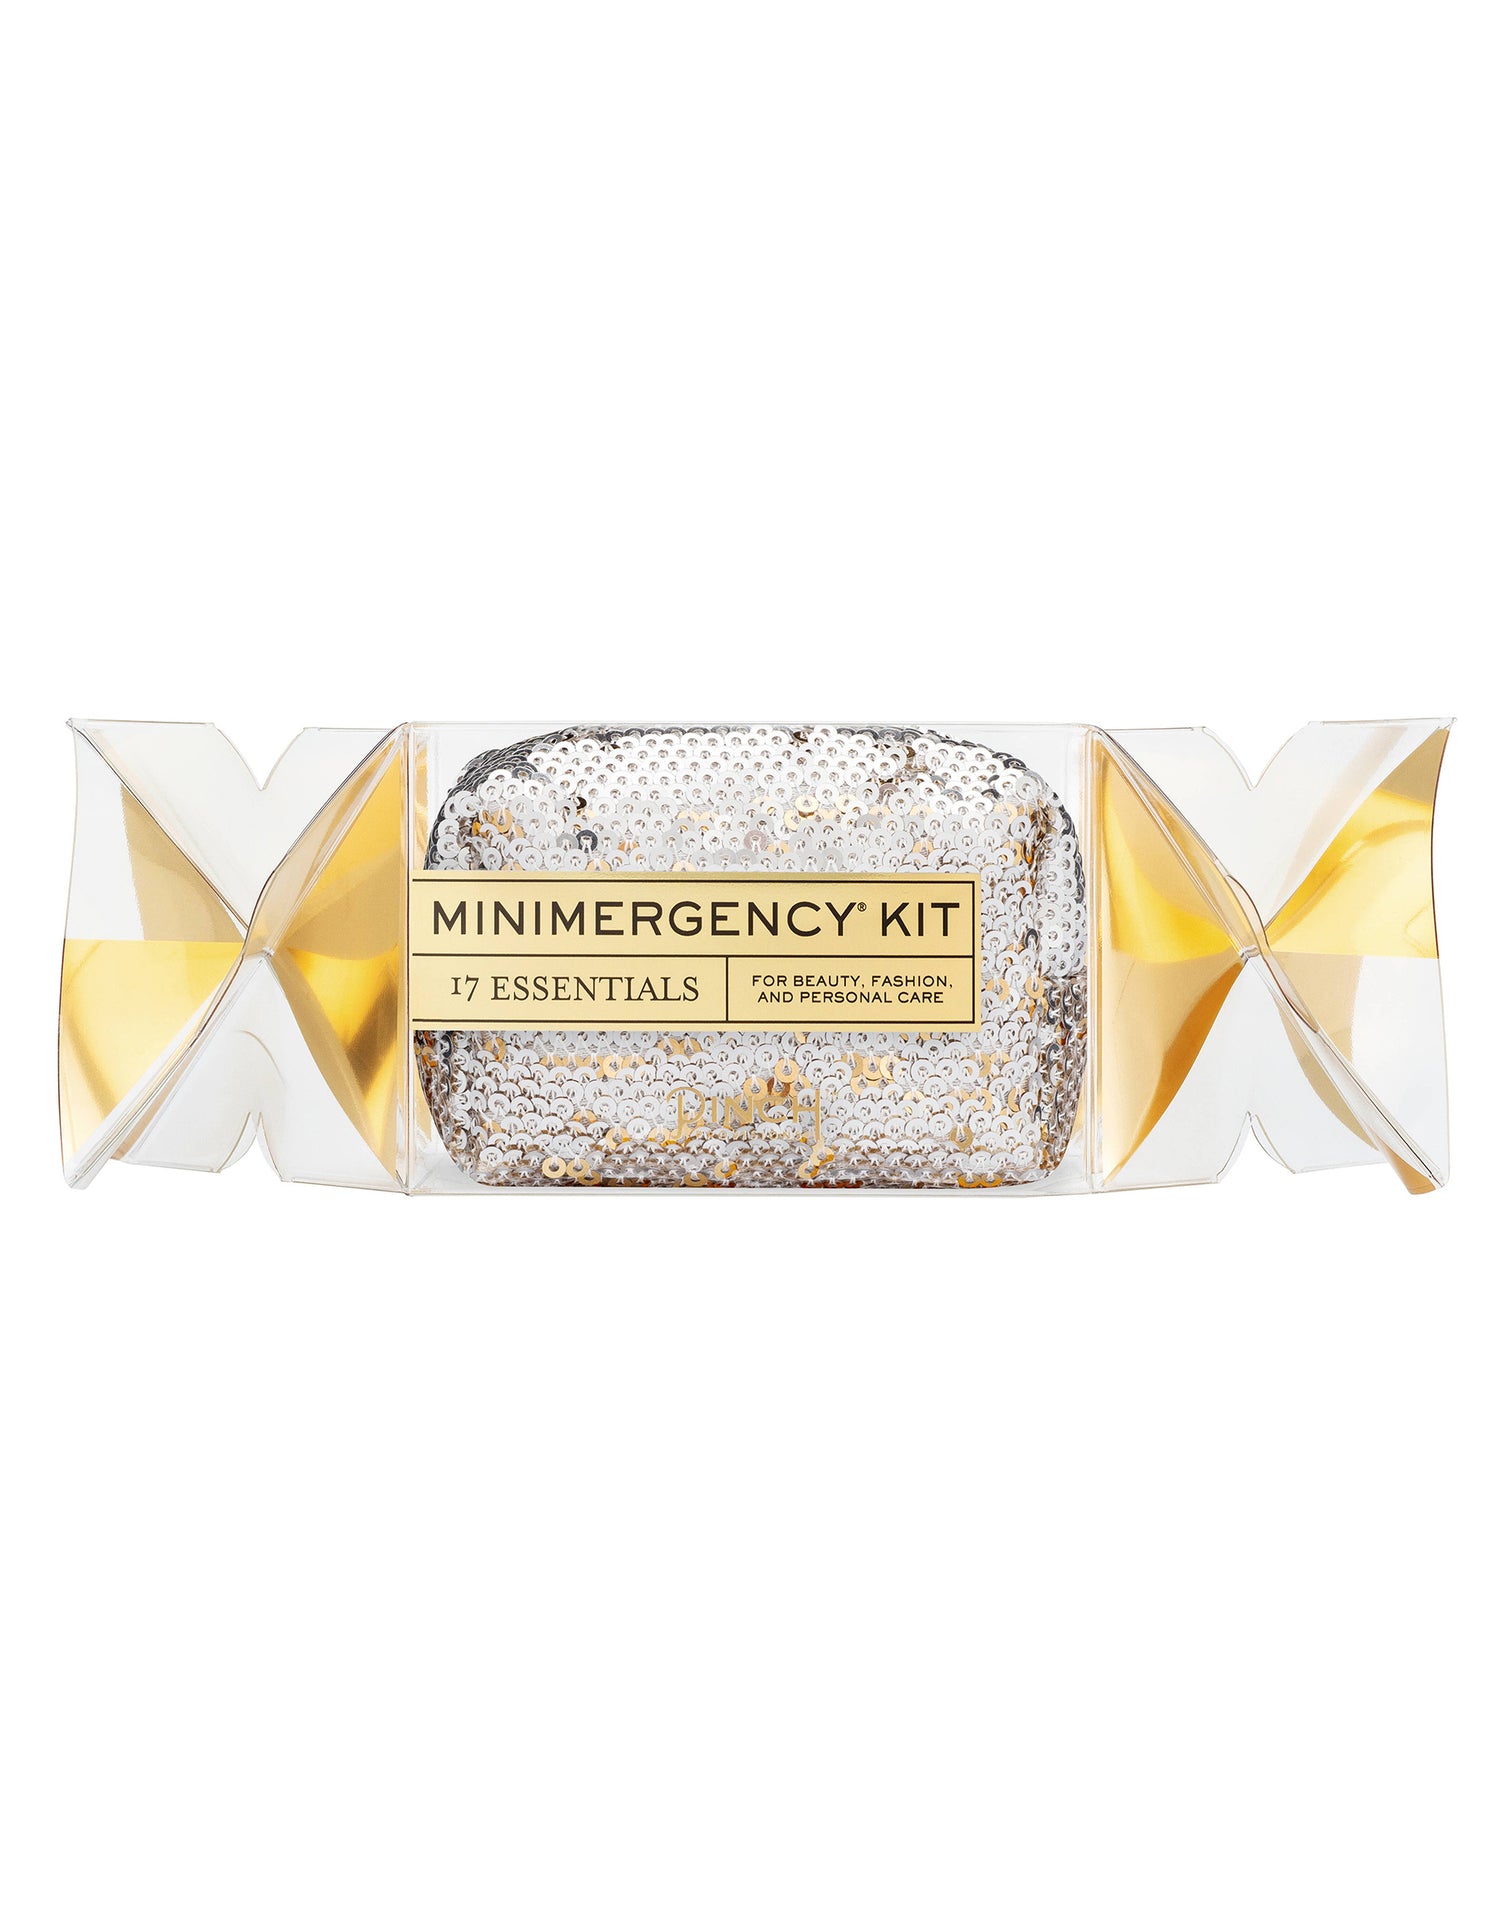 Cracker Minimergency Kit by Pinch Provisions in Silver/Gold - Product View